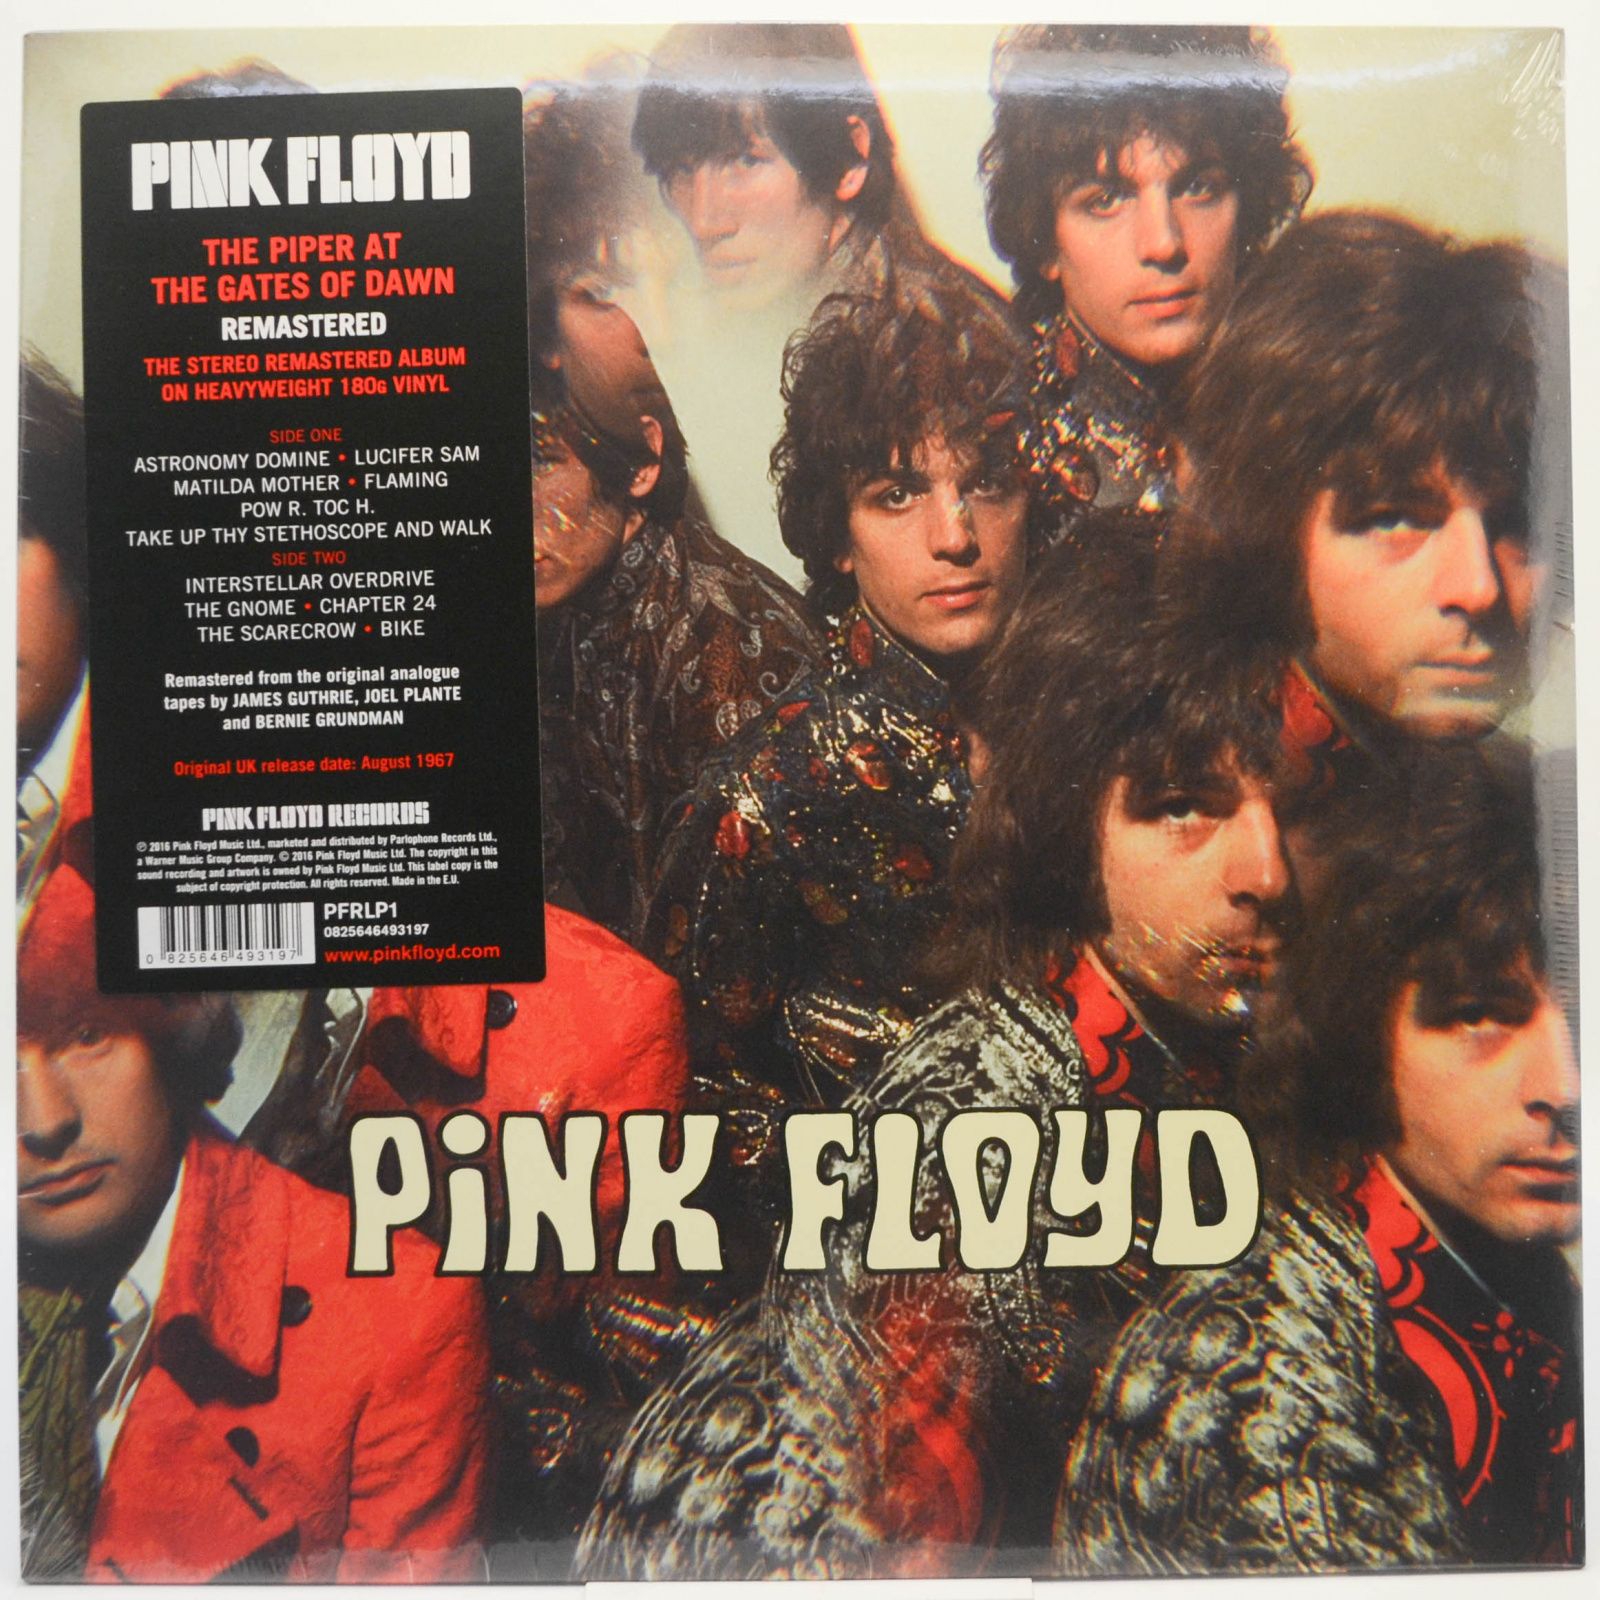 Pink Floyd — The Piper At The Gates Of Dawn, 1967